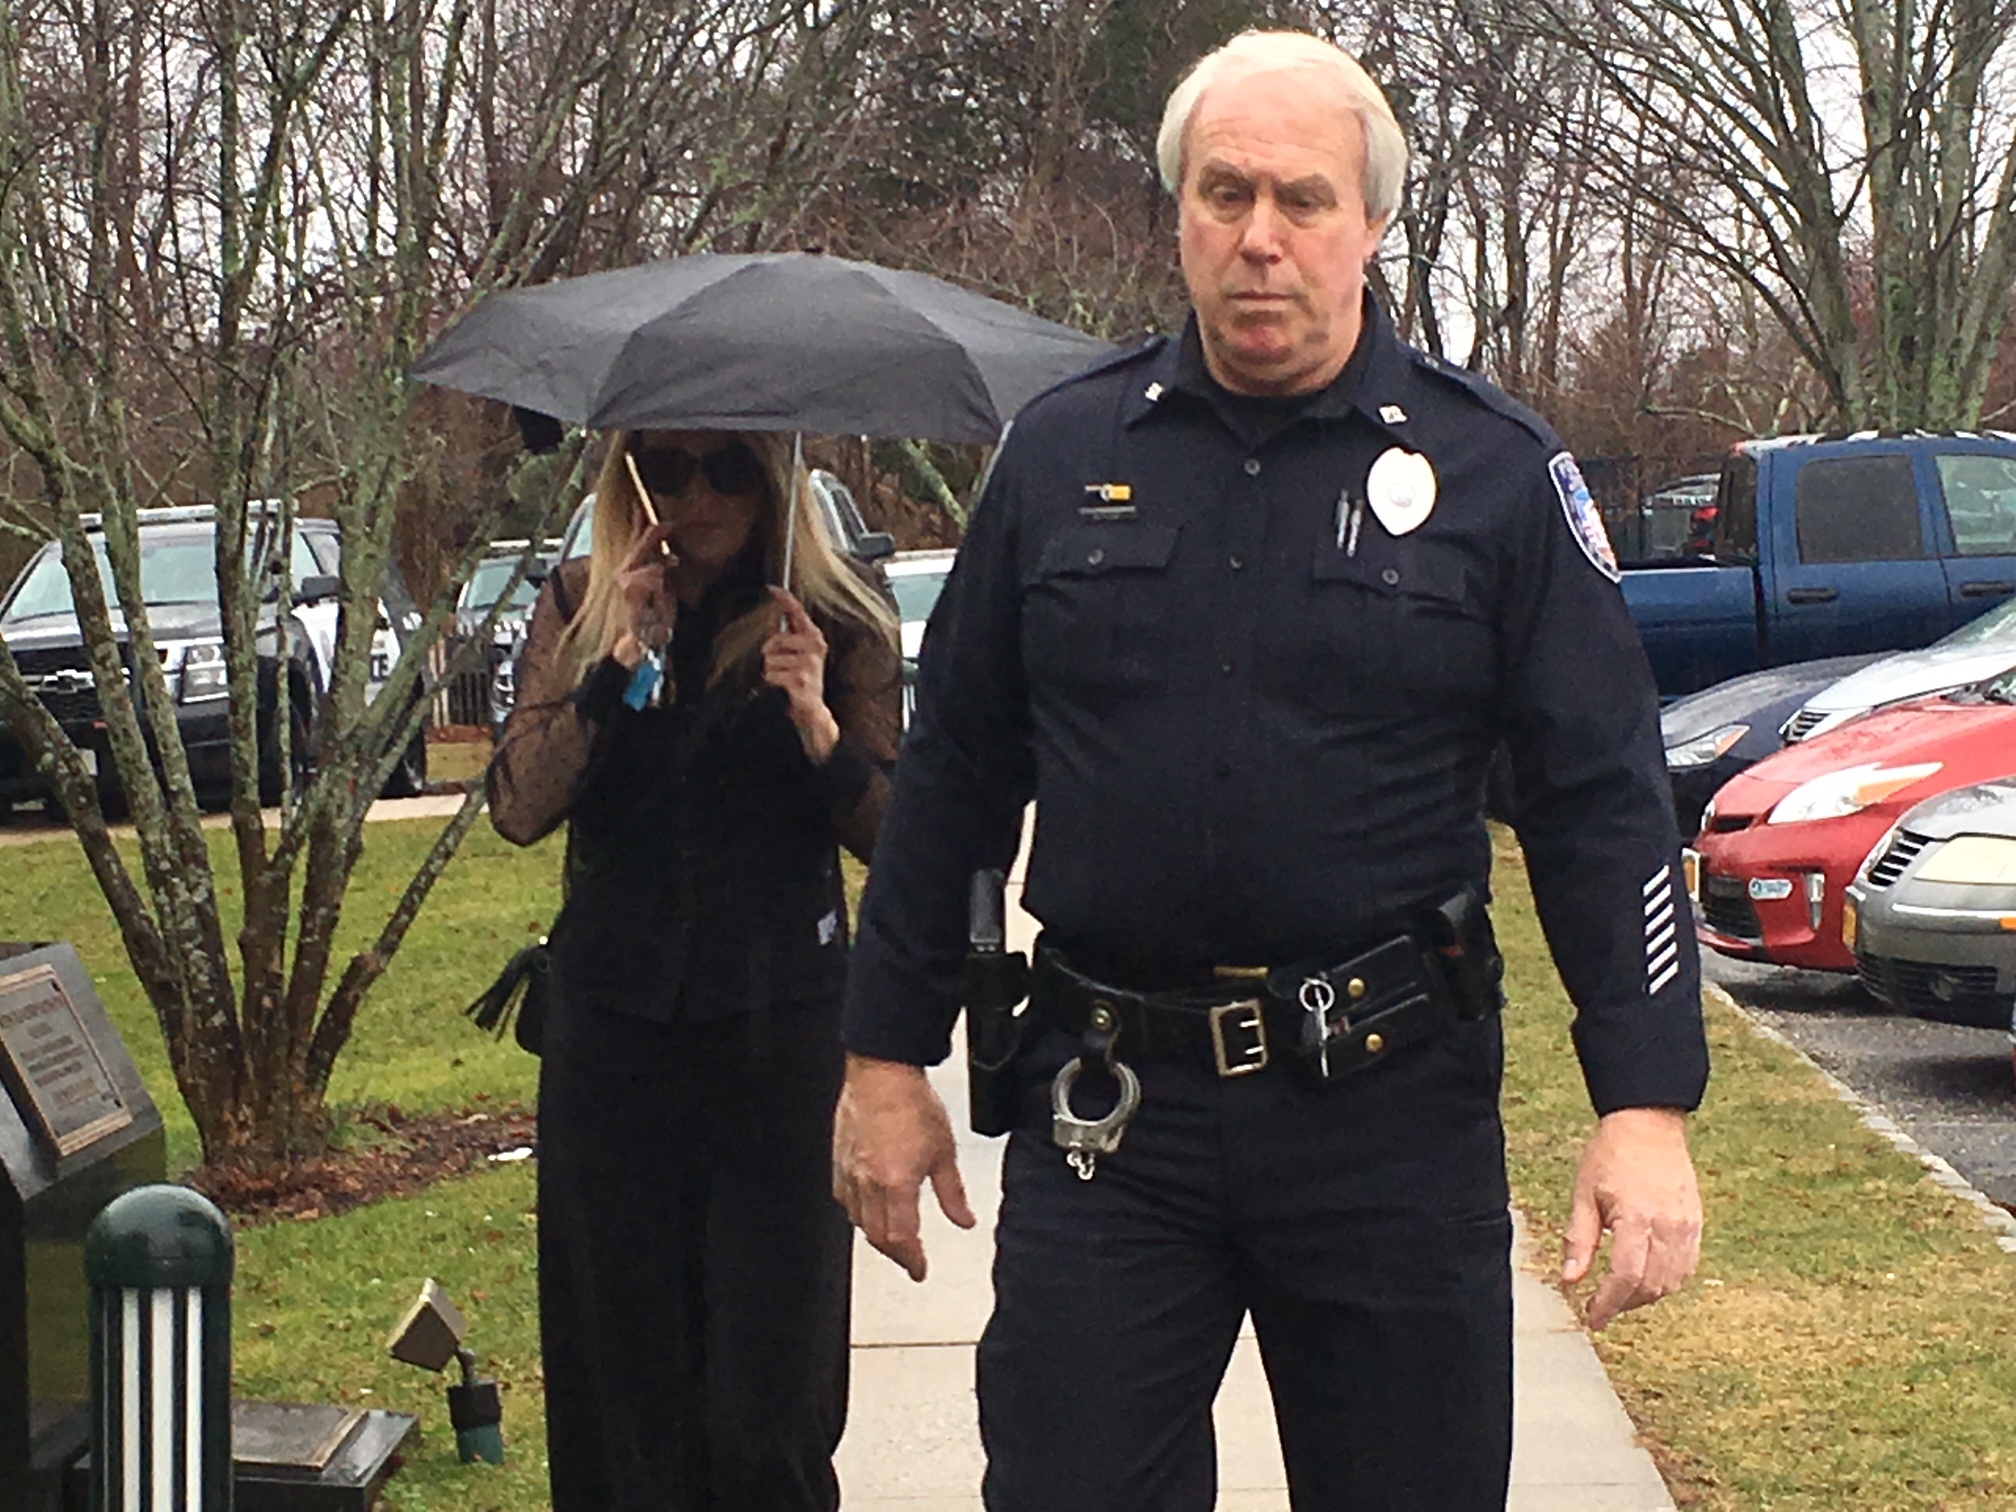 Kate Lohan is escorted into court in Southampton Village. KITTY MERRILL